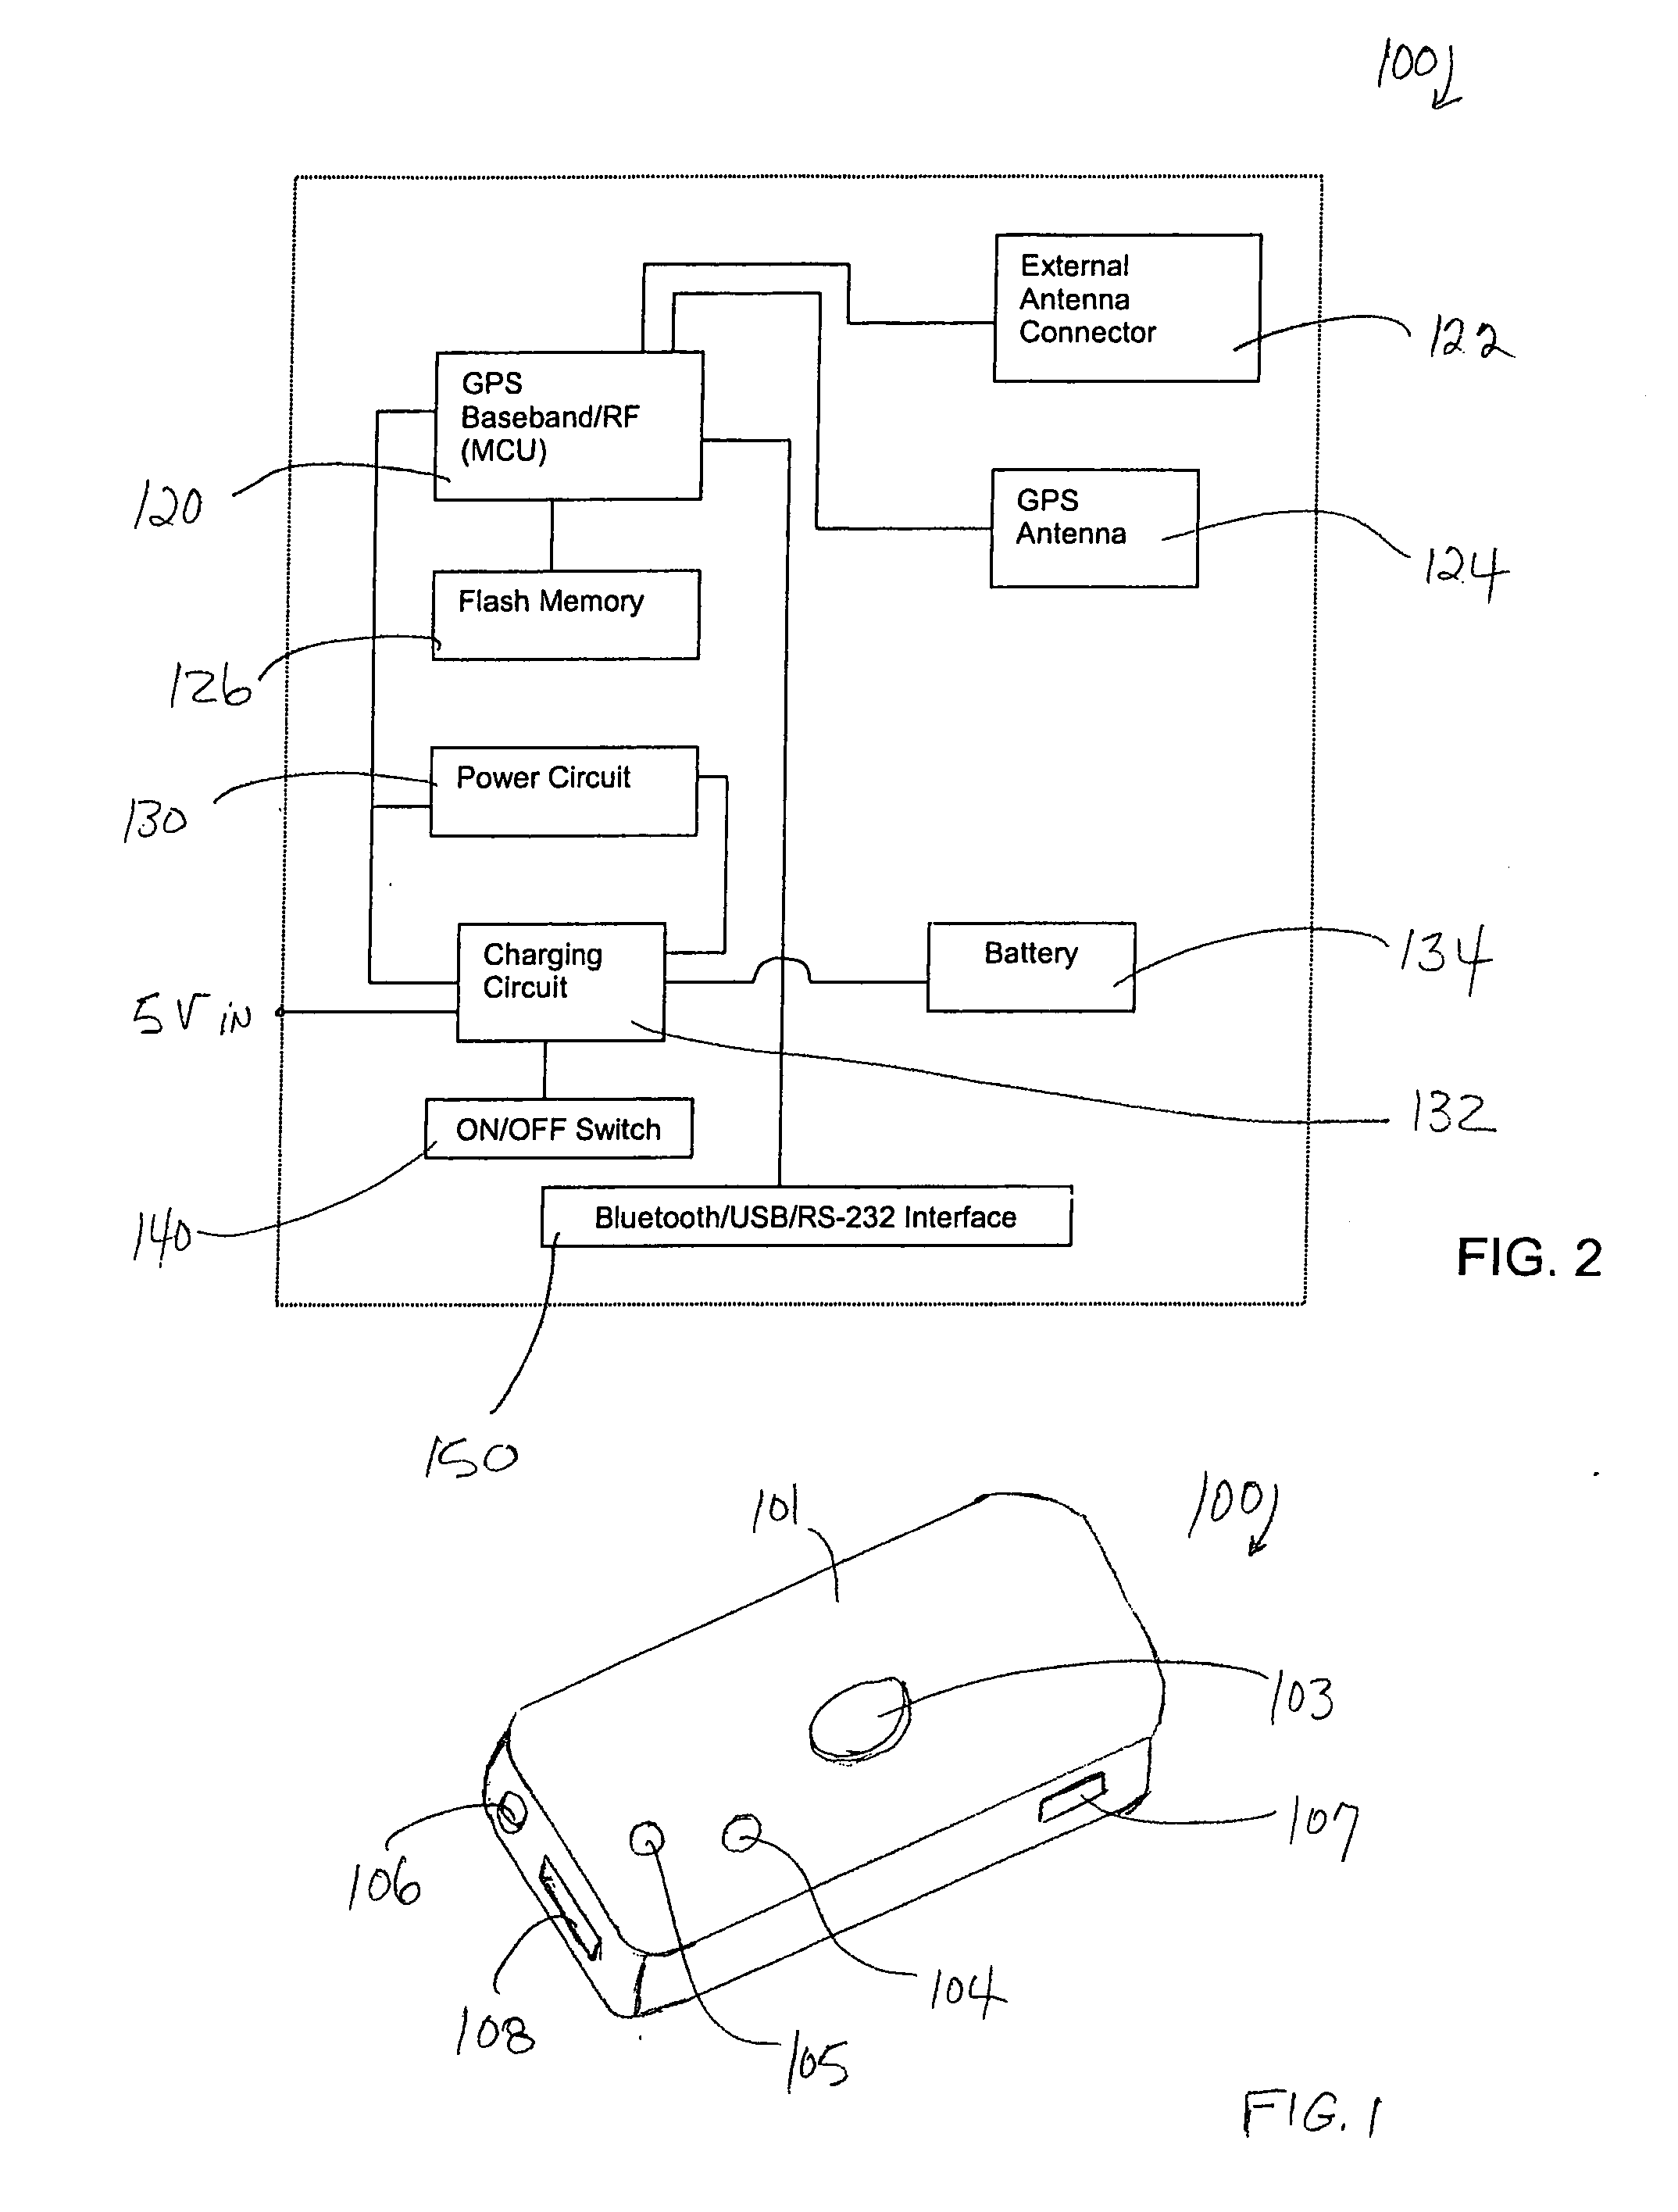 Method and device for processing raw GPS data